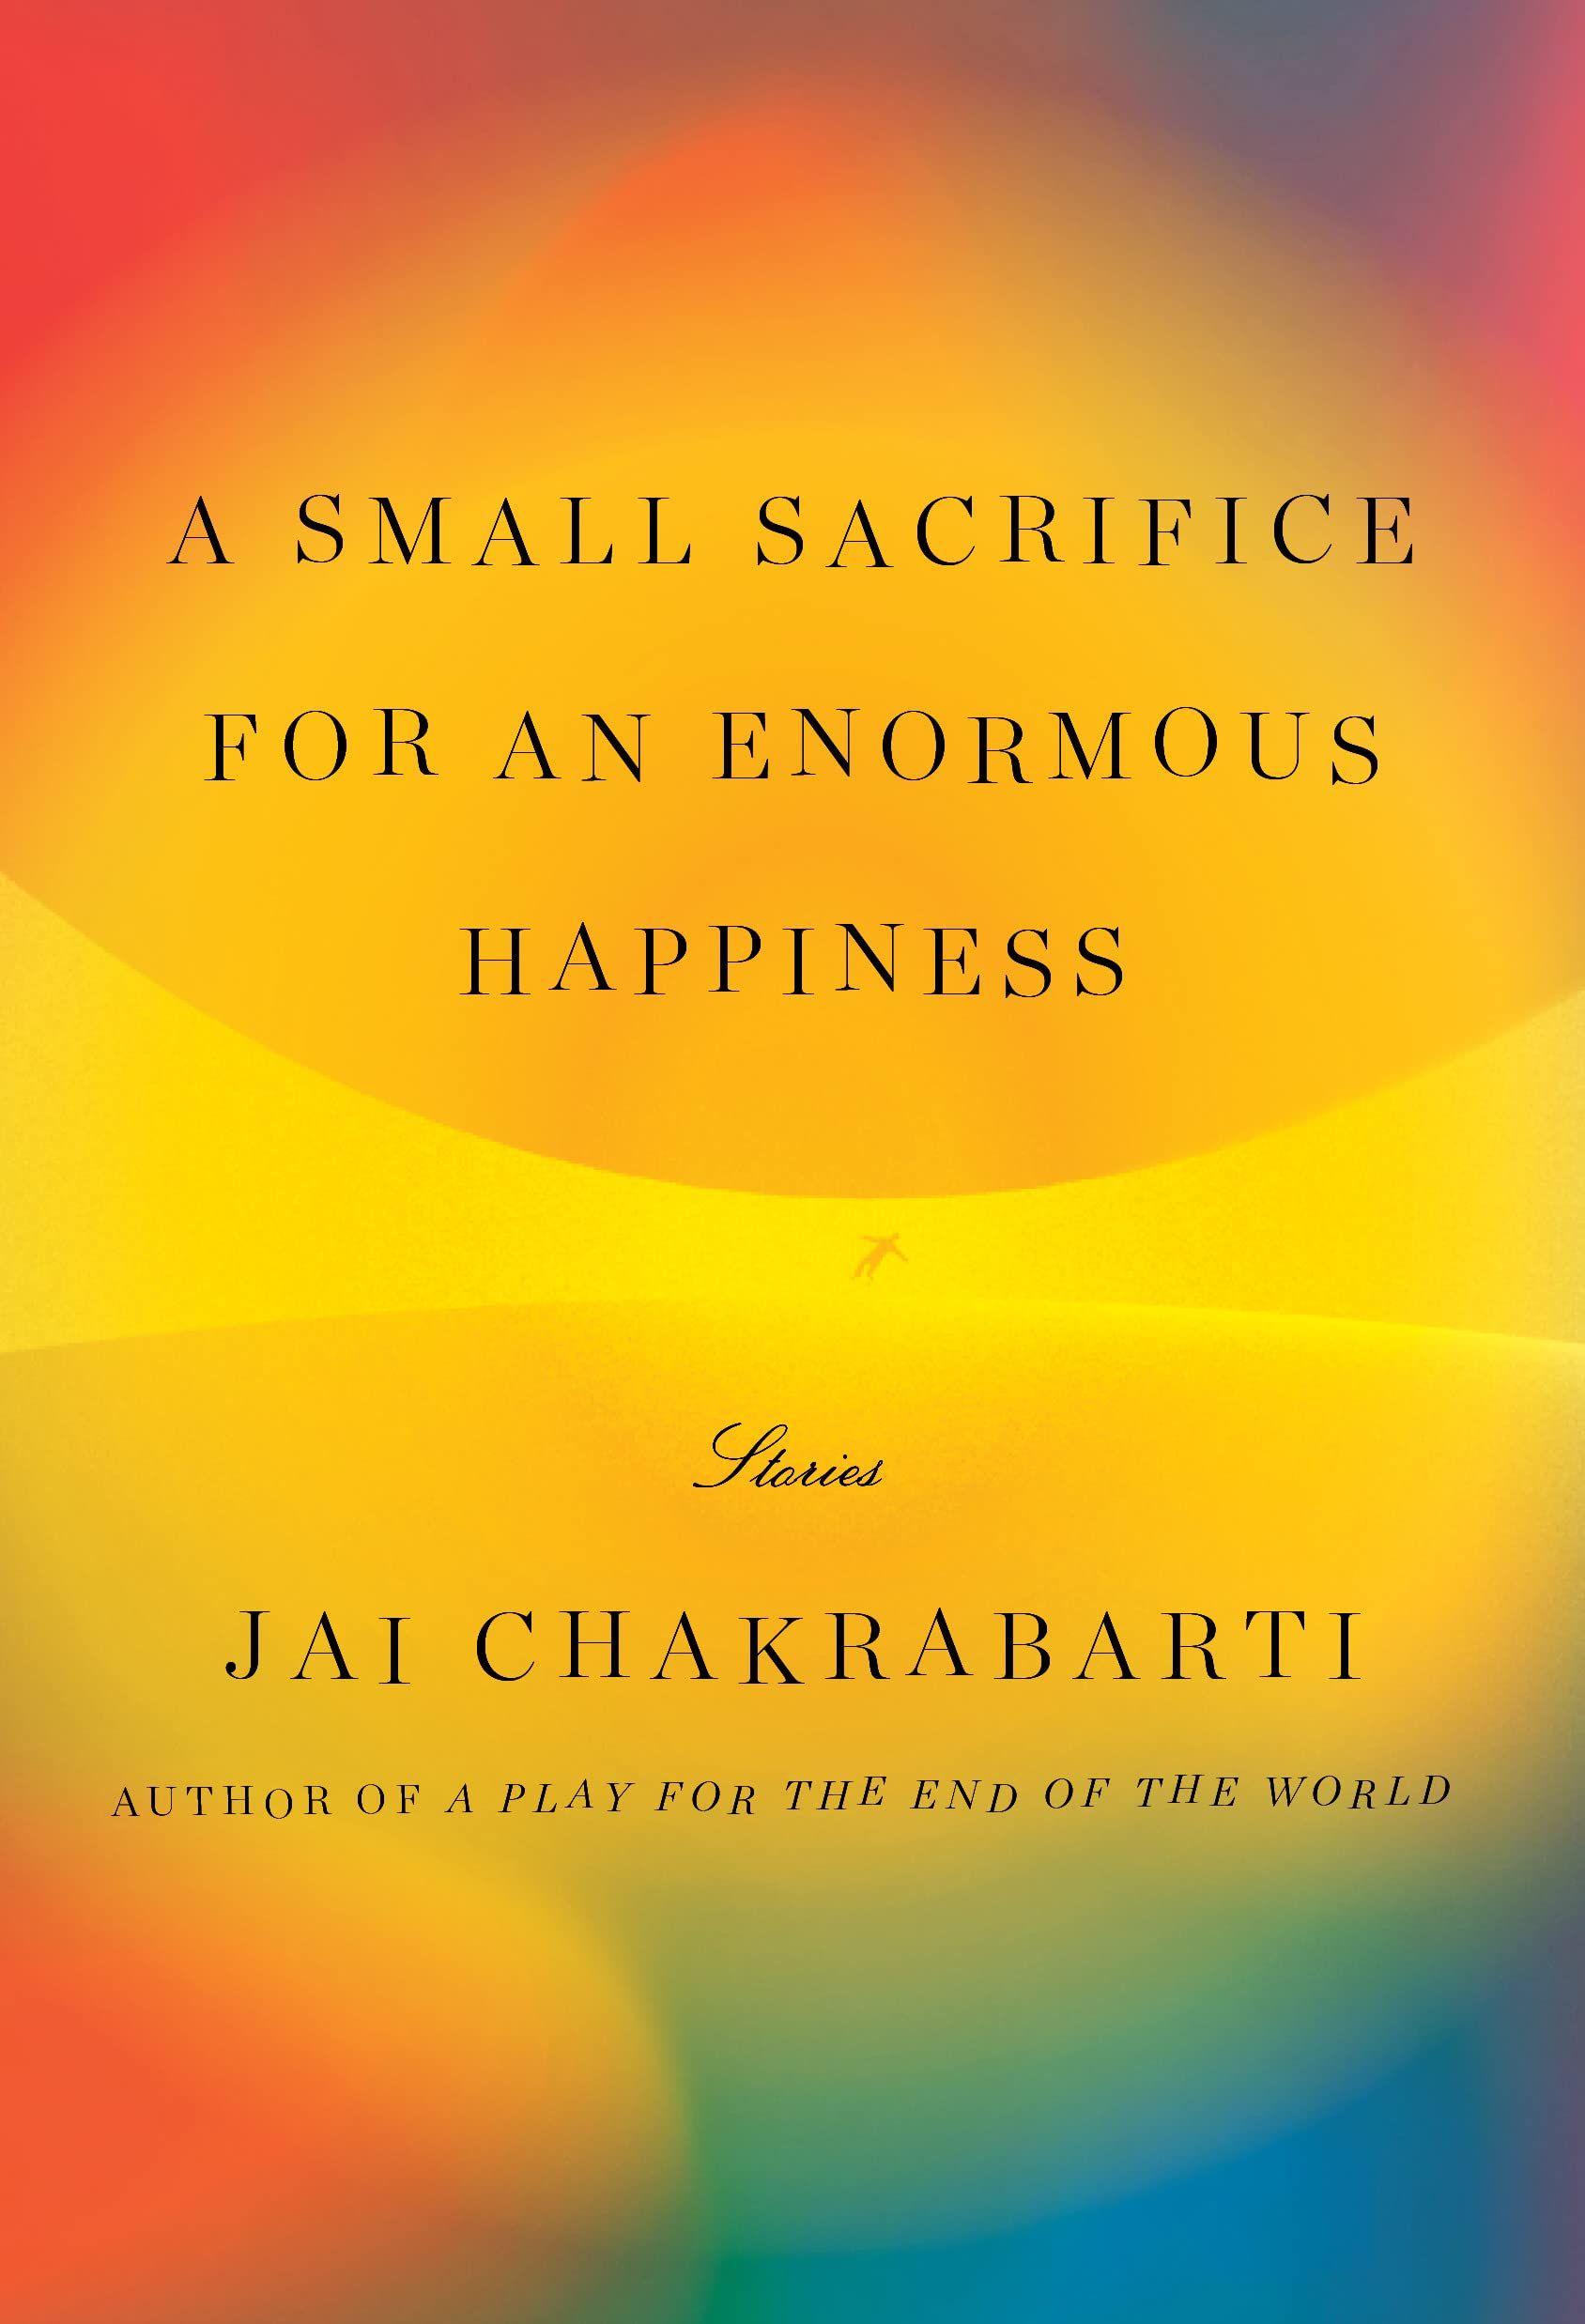 A Small Sacrifice for an Enormous Happiness by Jai Chakrabarti cover